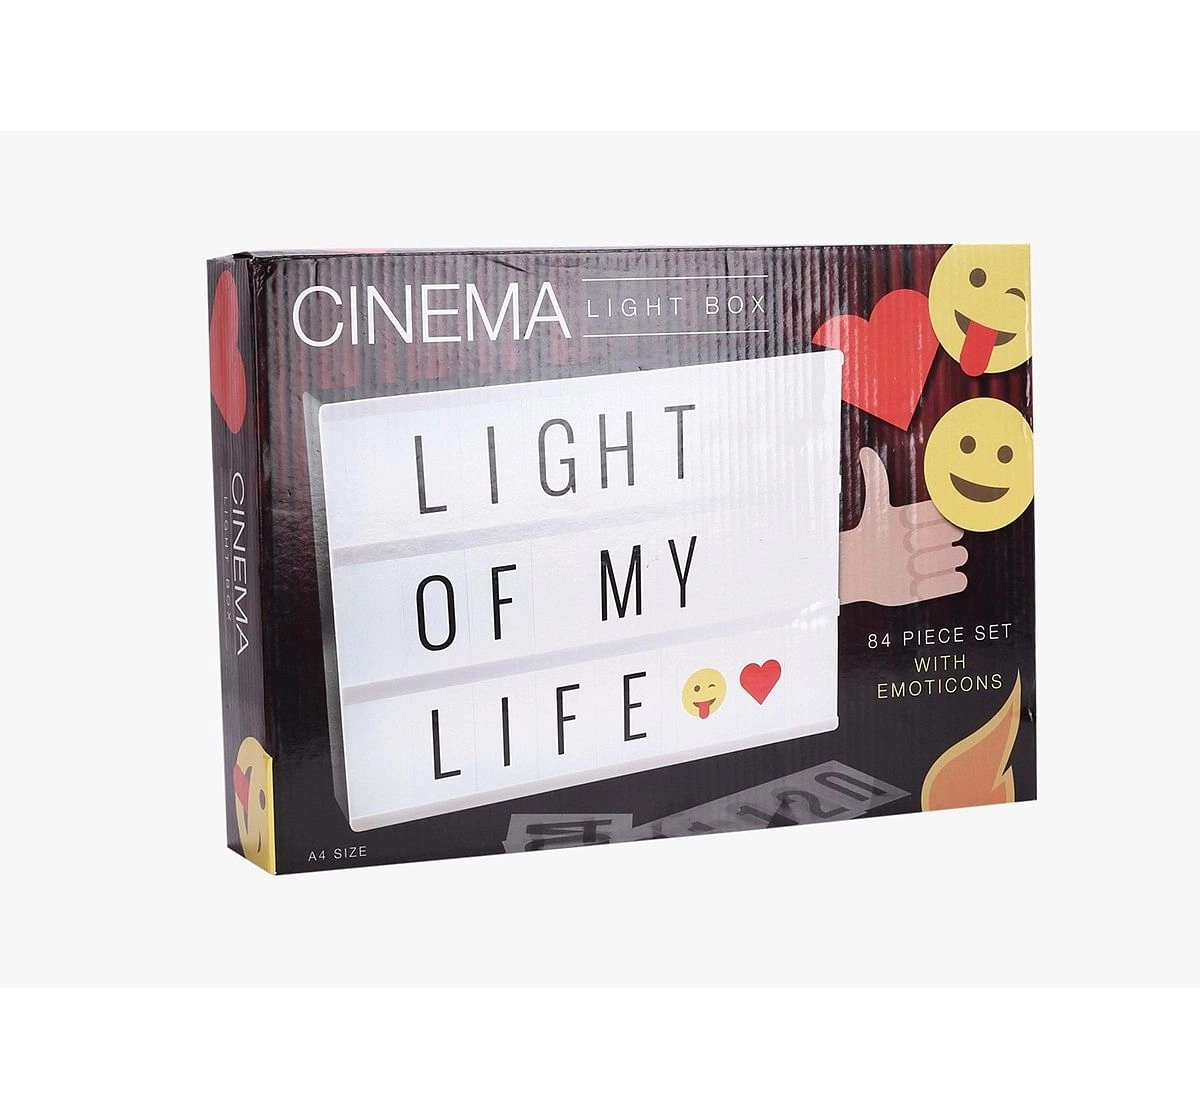  Red5 Cinema Light Box -Electronics Accessories for Kids age 3Y+ (White)